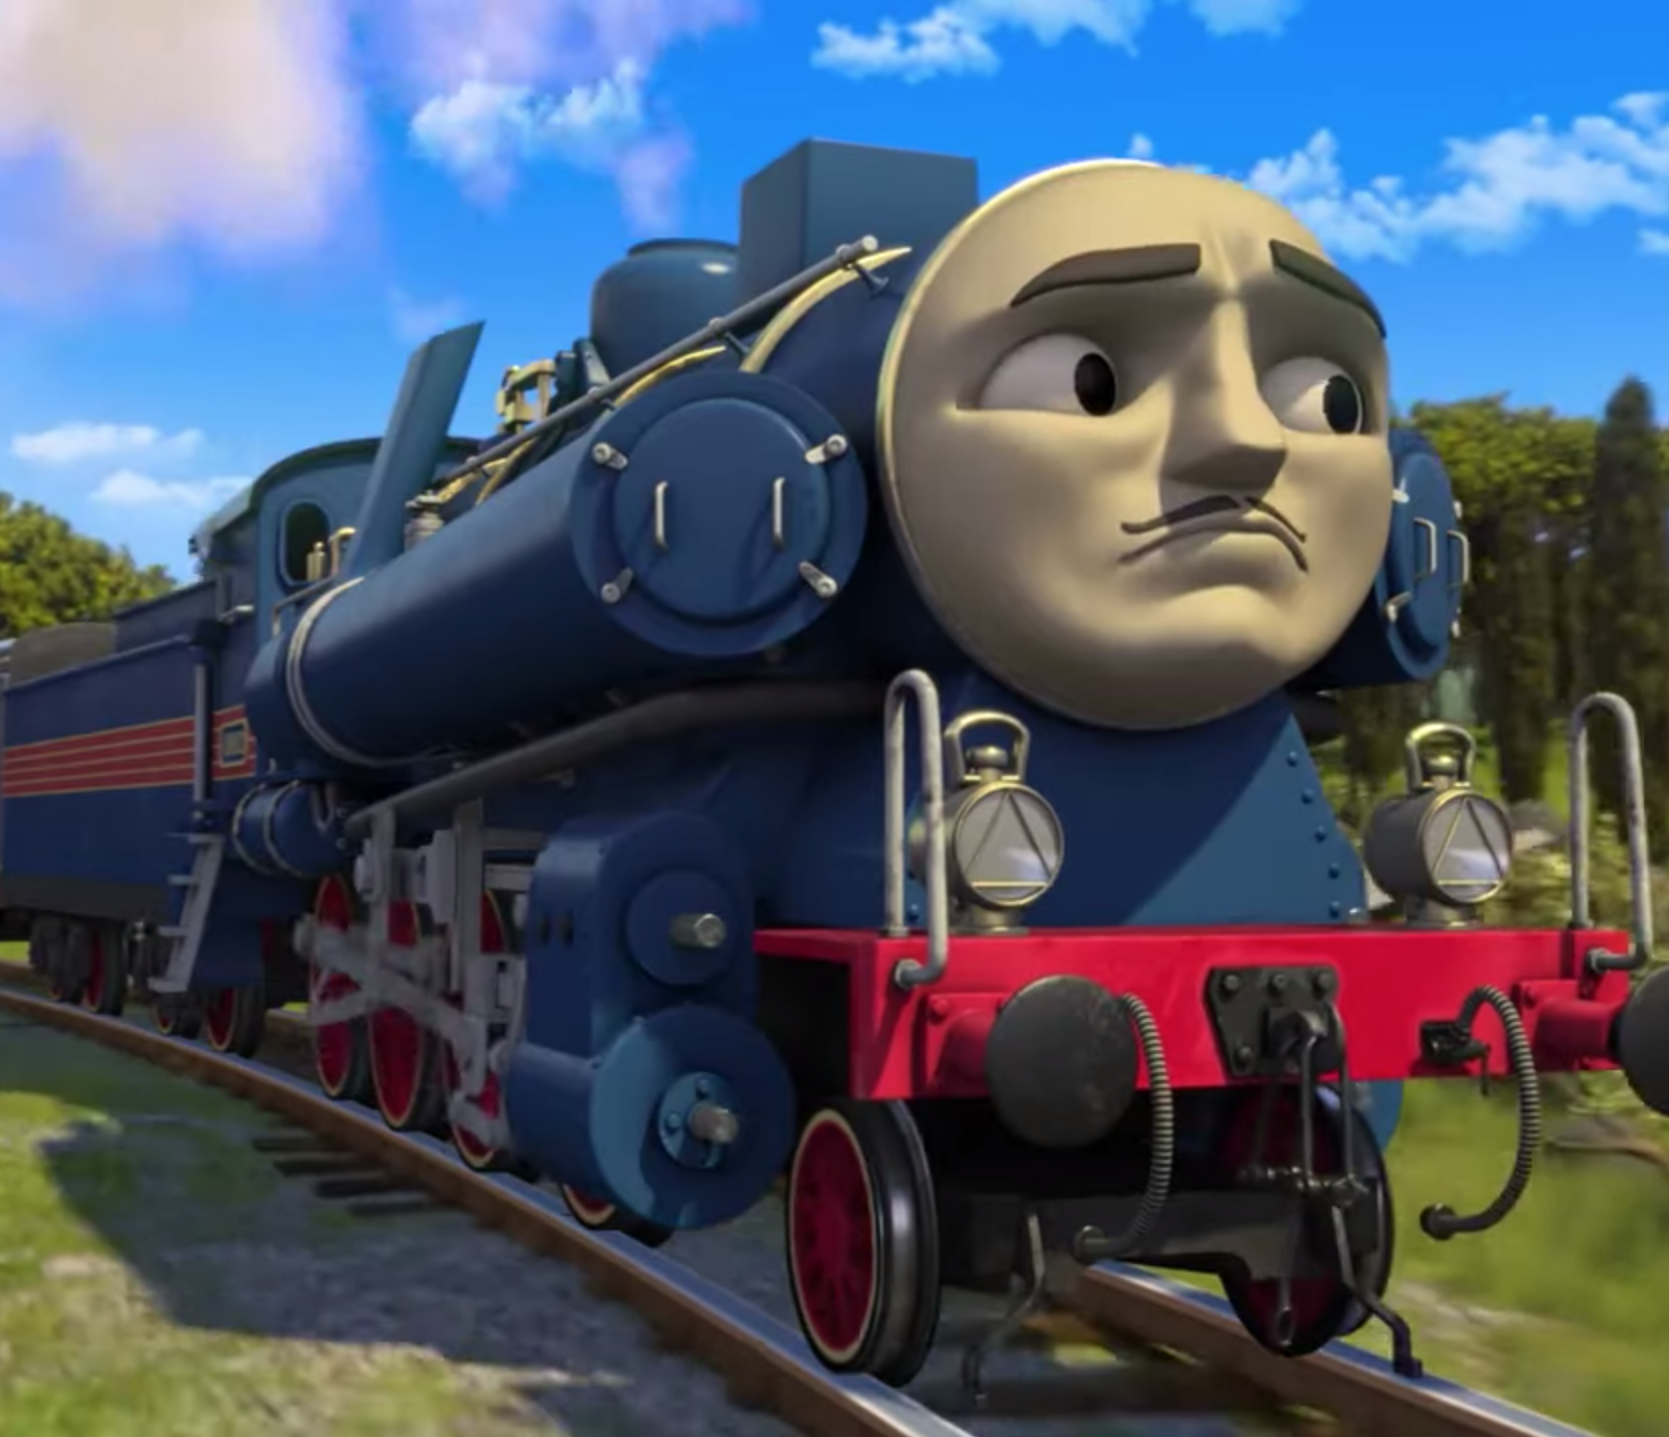 thomas and friends trackmaster lorenzo and pepe